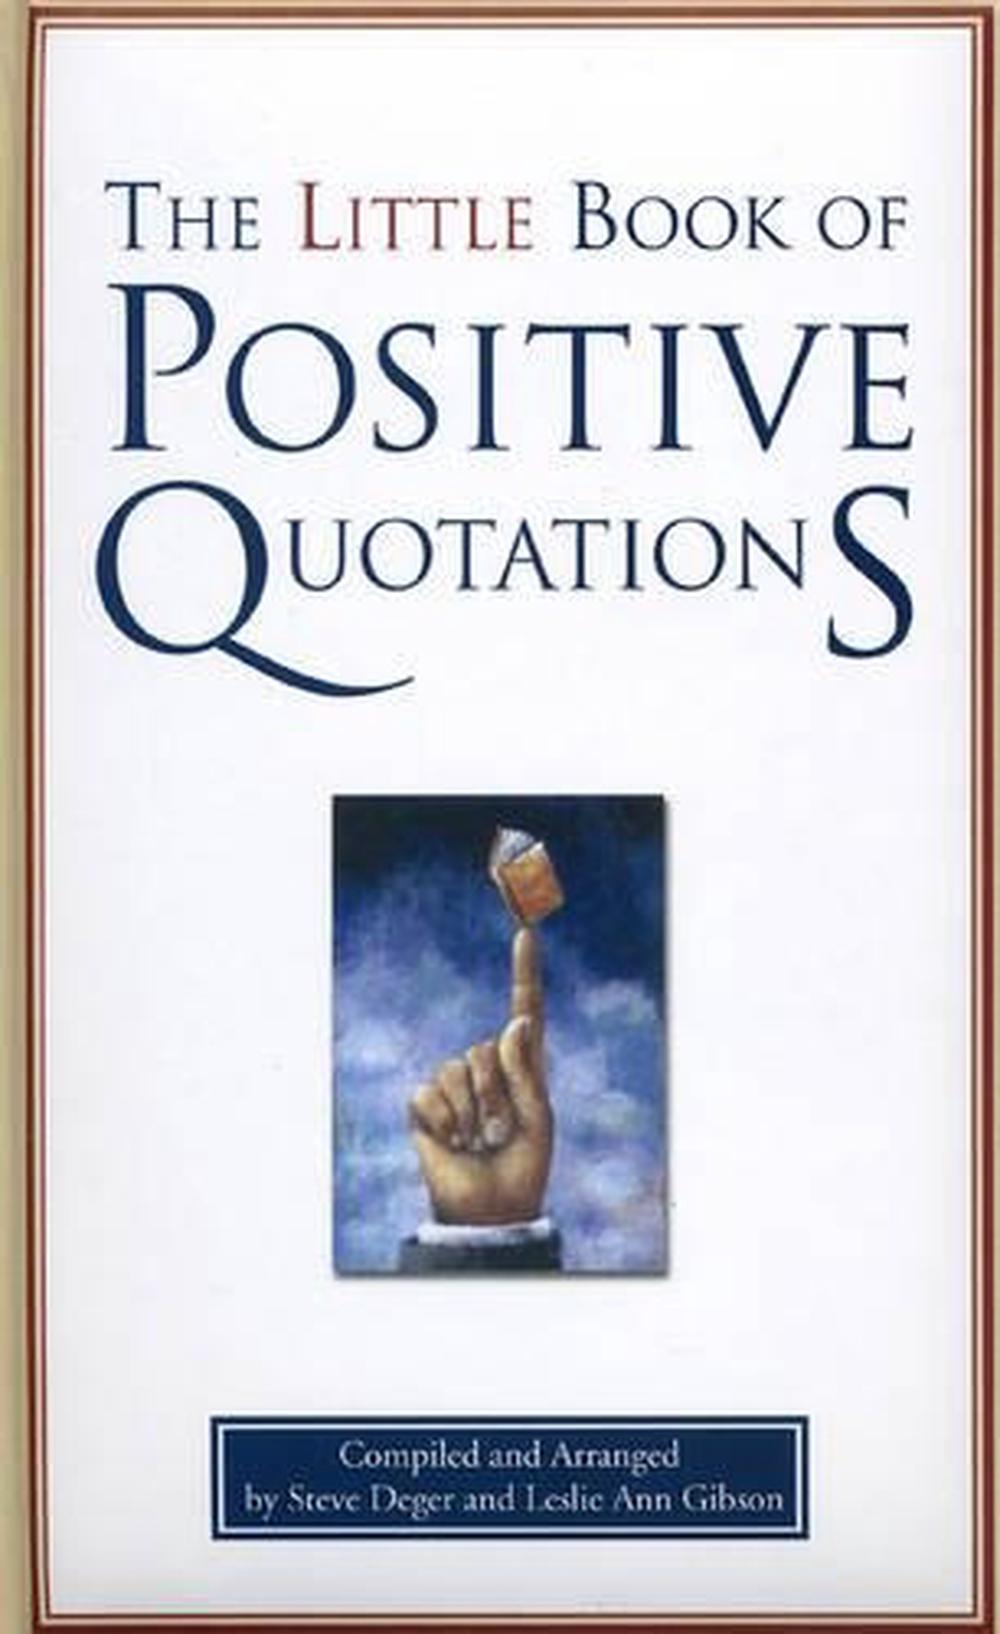 69 List A Little Book Of Quotations for Learn